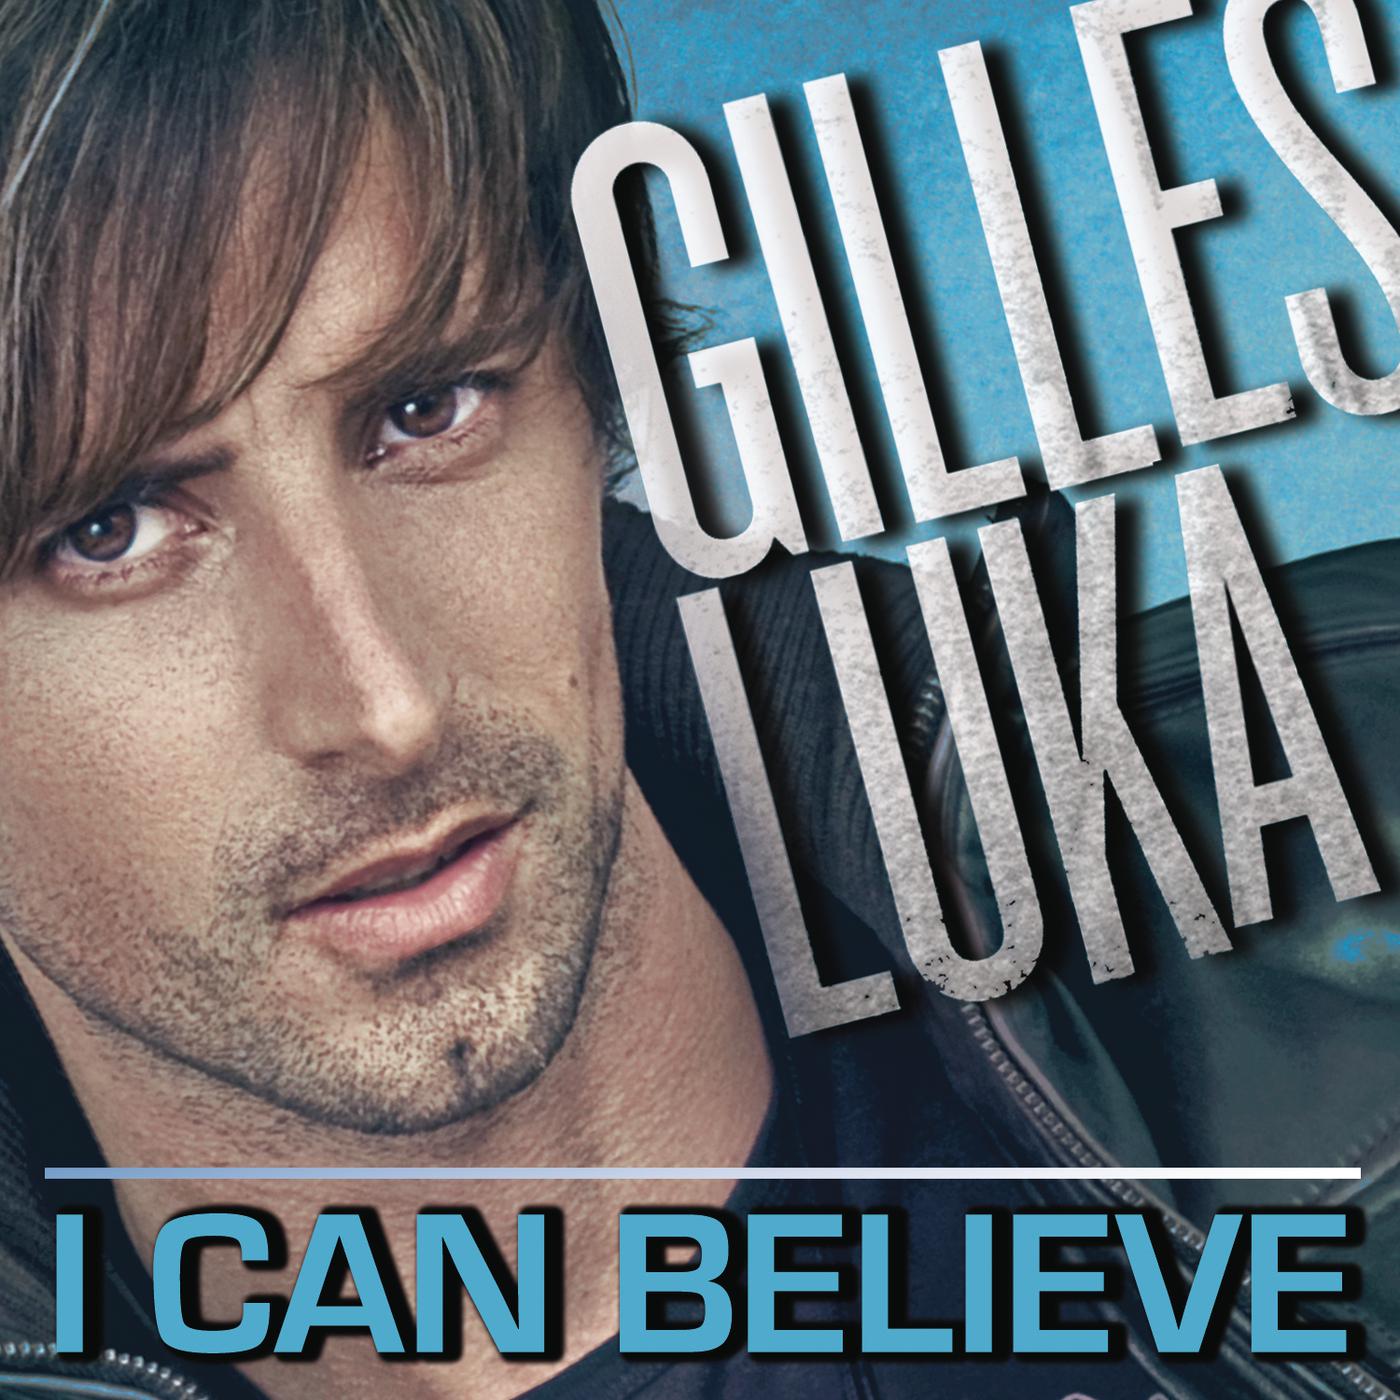 Gilles Luka - I Can Believe (Jusqu'au bout) (Extended)